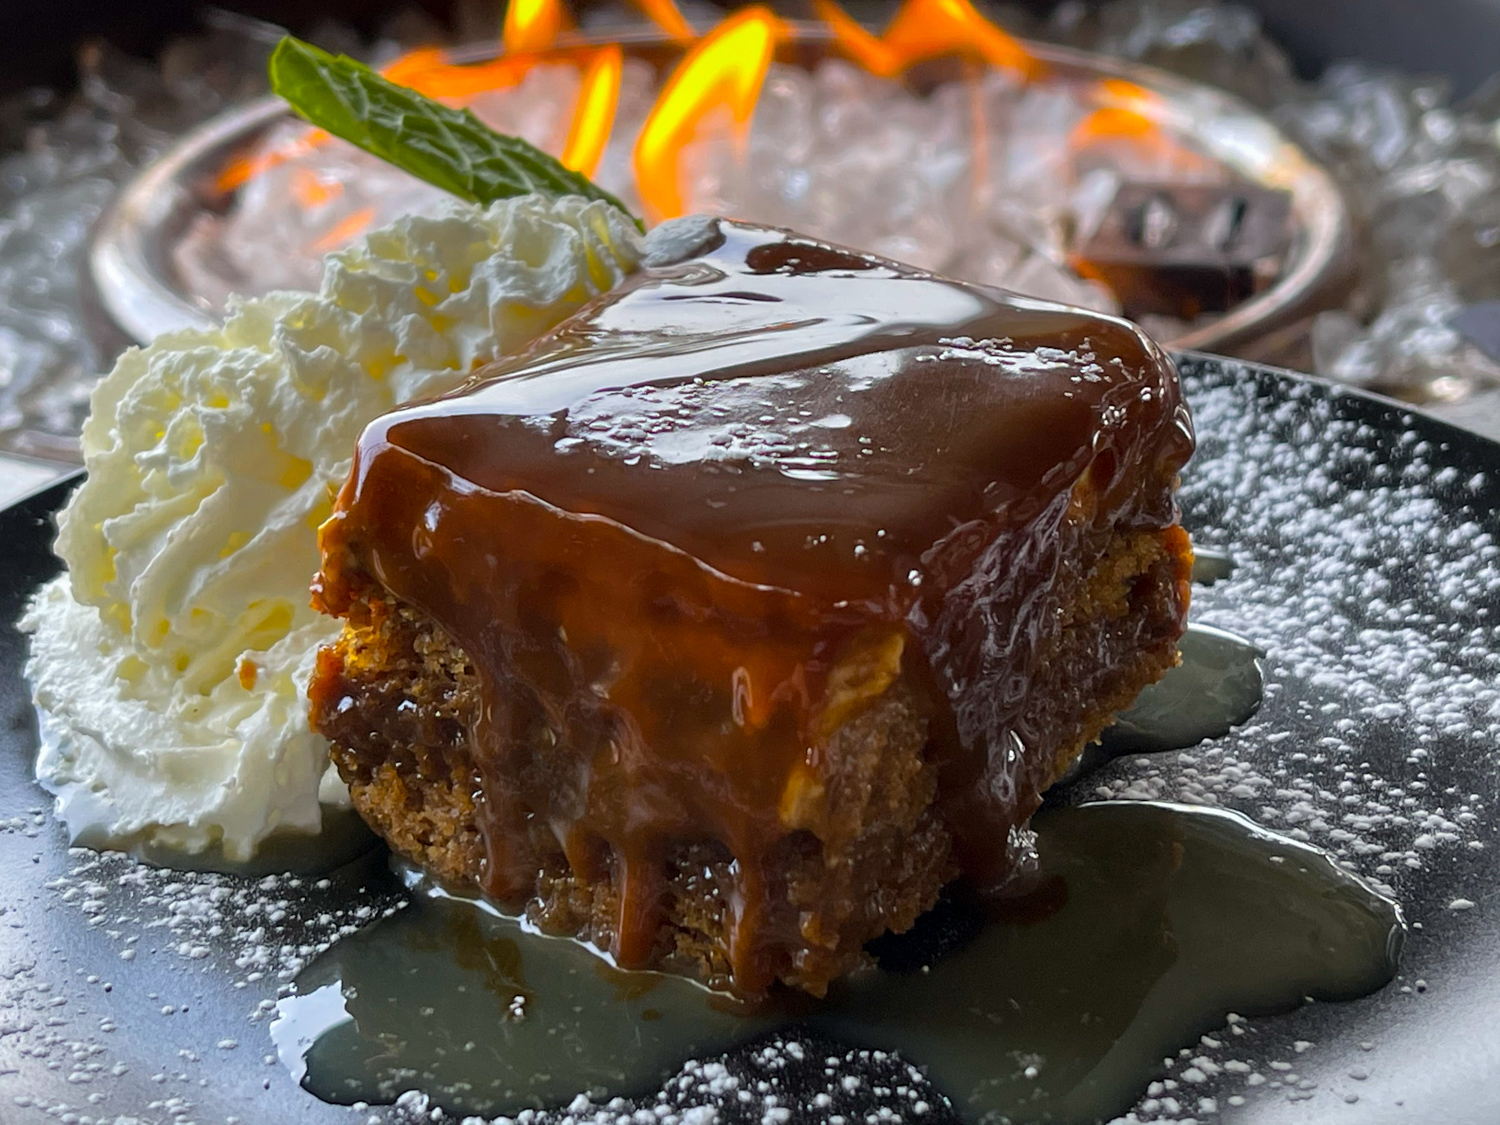 MacGregor’s Sticky Toffee Cake – An Oregon Coast Culinary Gem You Don’t Want to Miss! By Steven Shomler